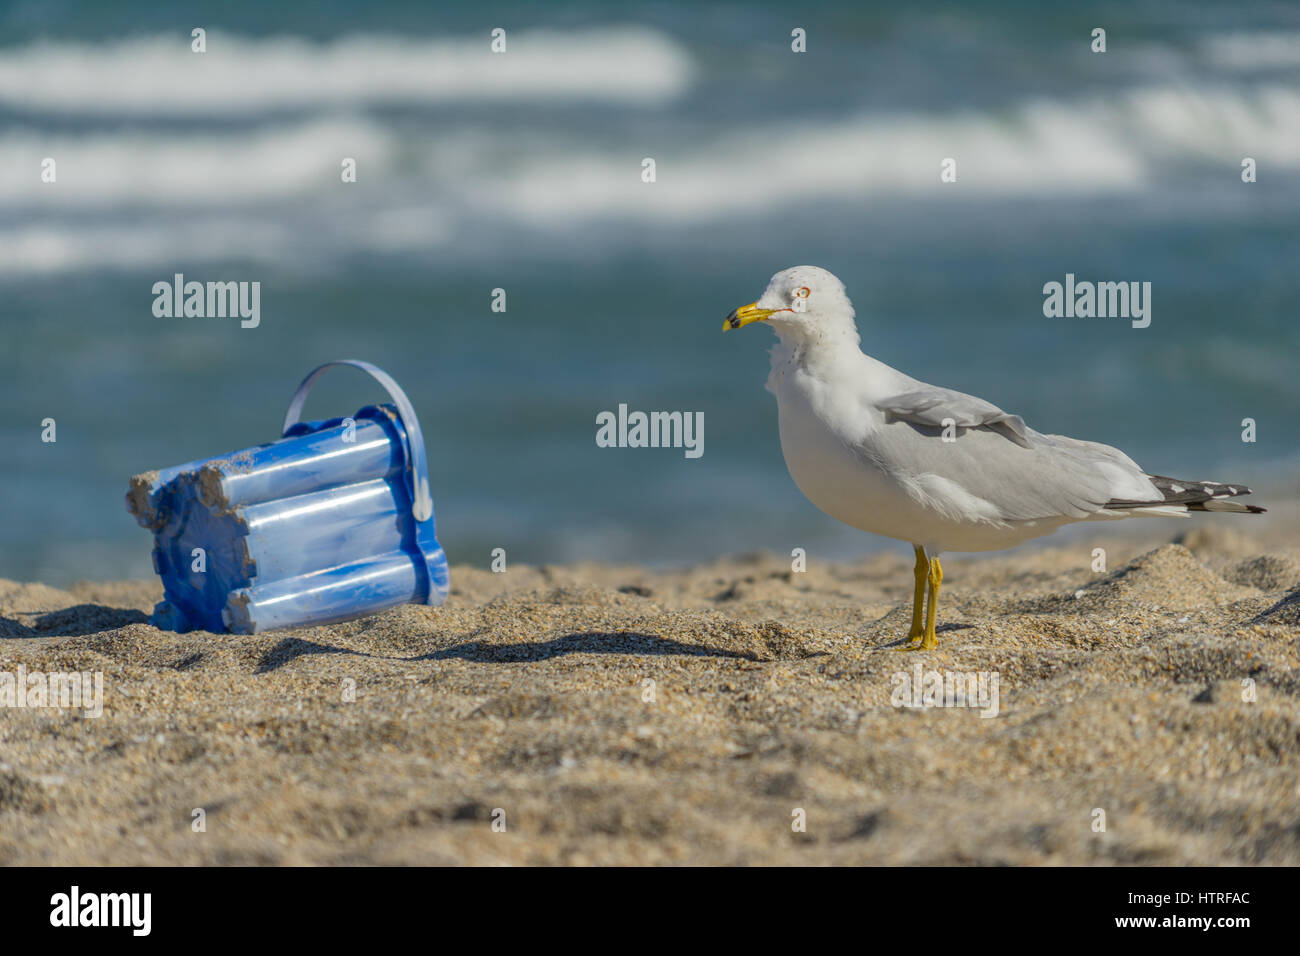 A Seagull contemplates a sand bucket abandoned on the beach Stock Photo